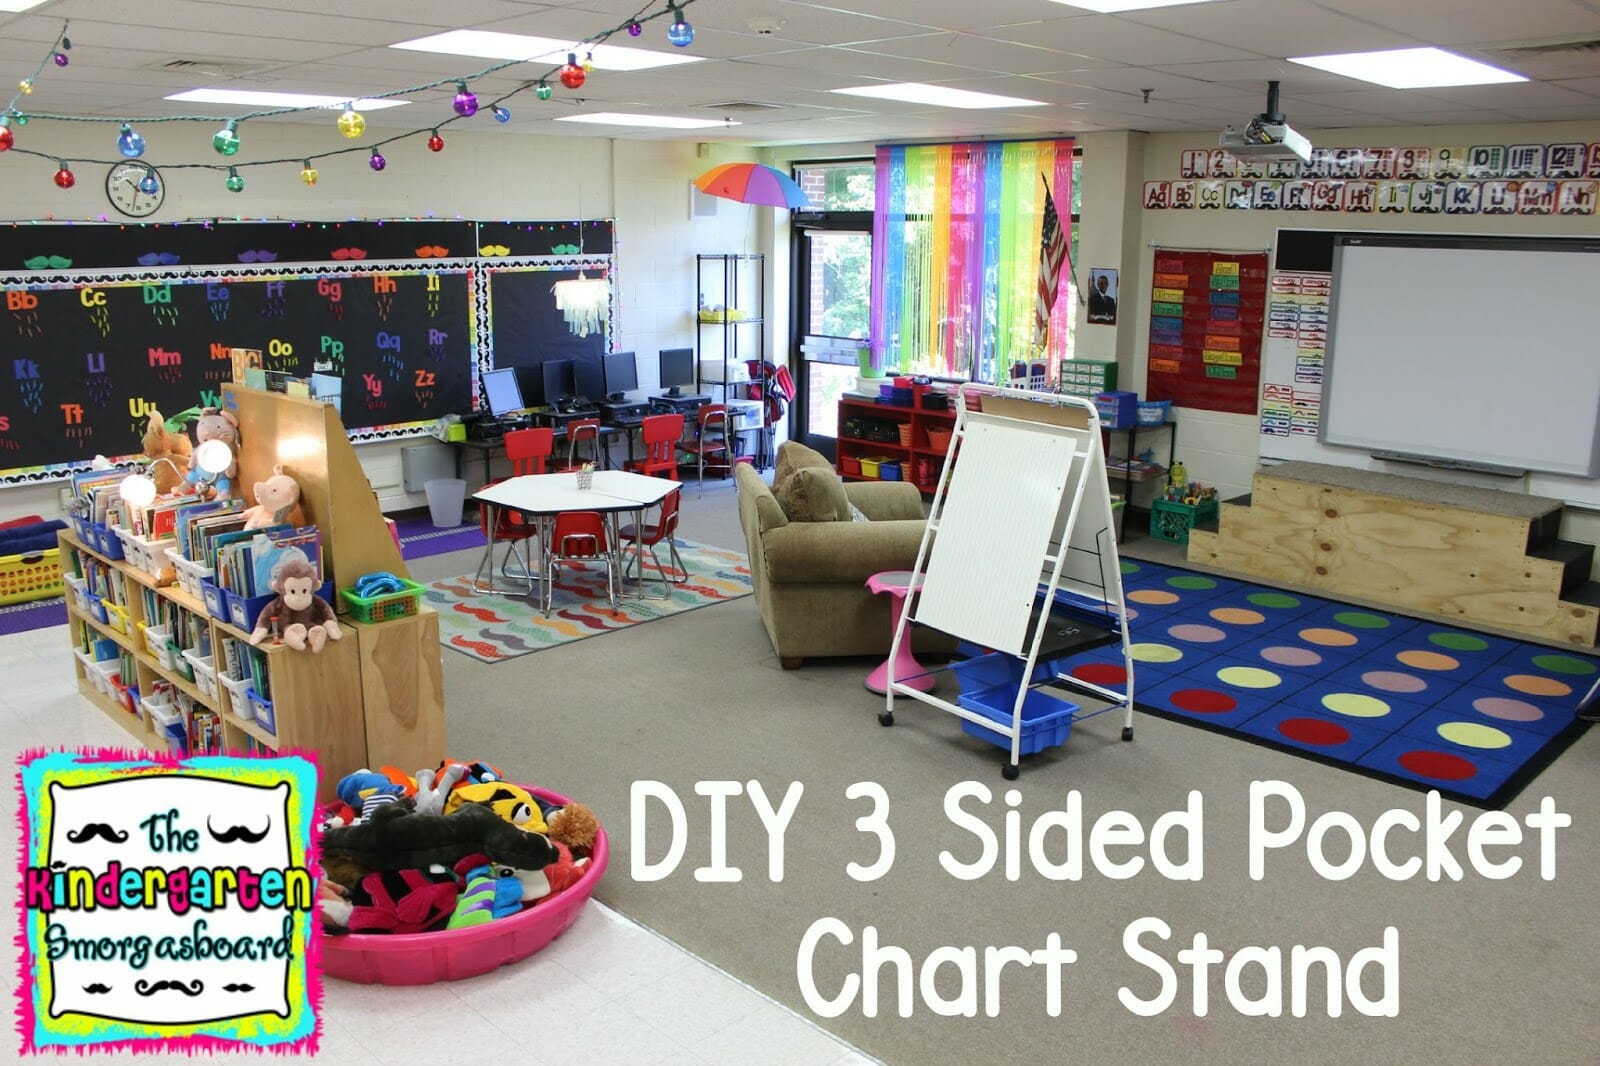 How To Make A Pocket Chart Stand